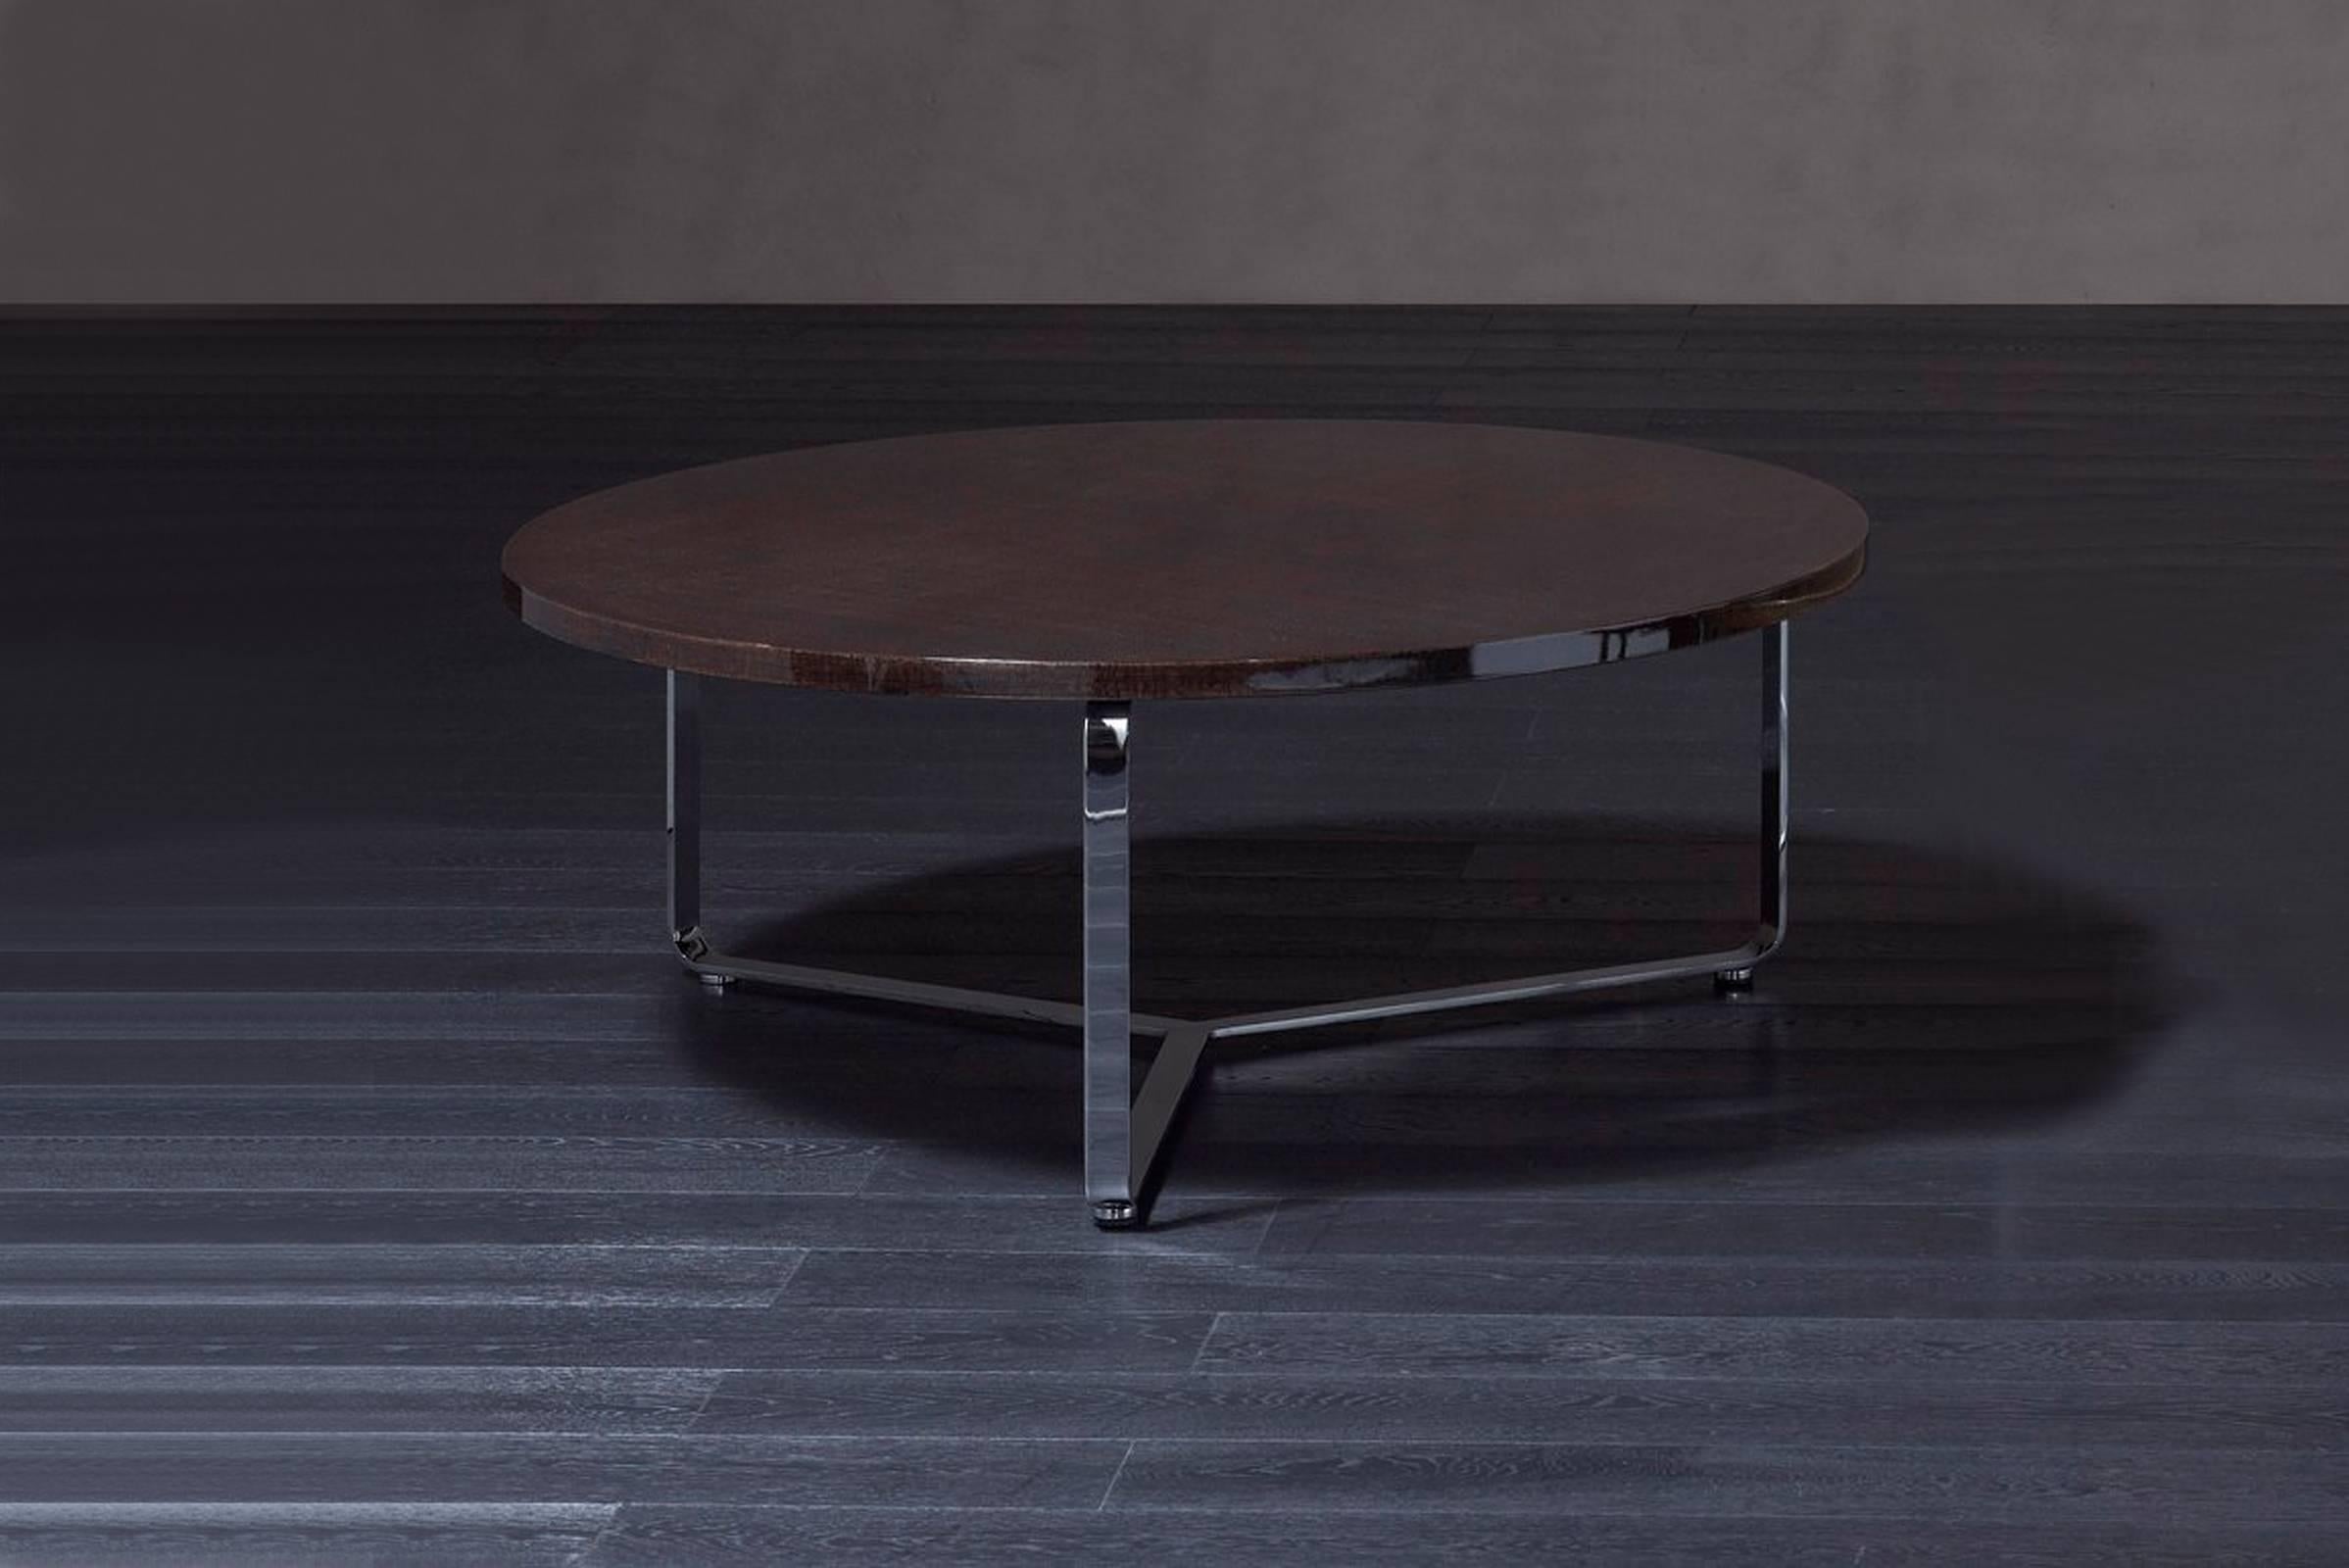 Round Coffee table Edge Structure with polished stainless steel,
Top with leather category B. Structure available in bronze.
Top available in laquered painted decoration.
For costum special decoration, there will be a 20% increase on the